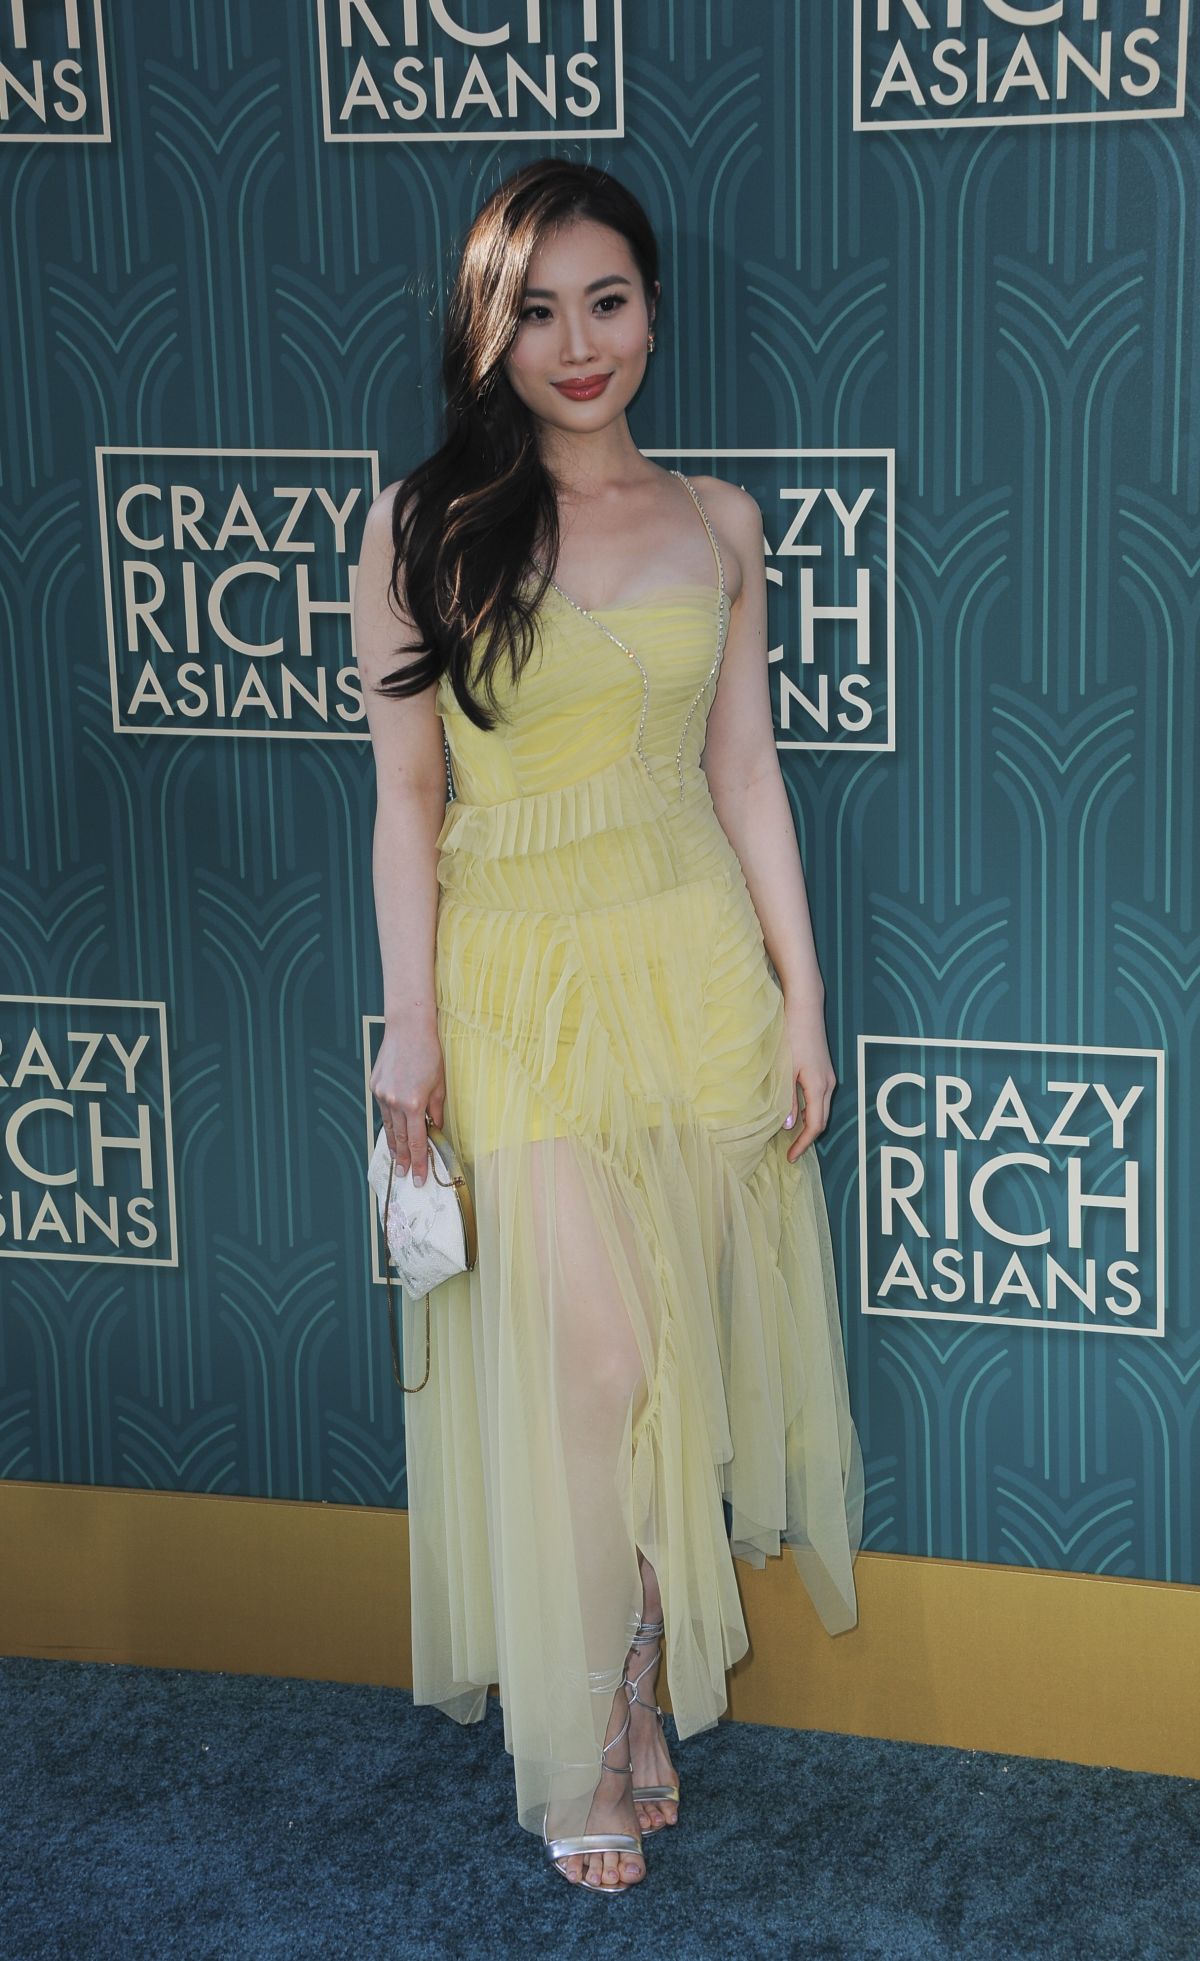 VICTORIA LOKE at Crazy Rich Asians Premiere in Los Angeles 08/07/2018 ...